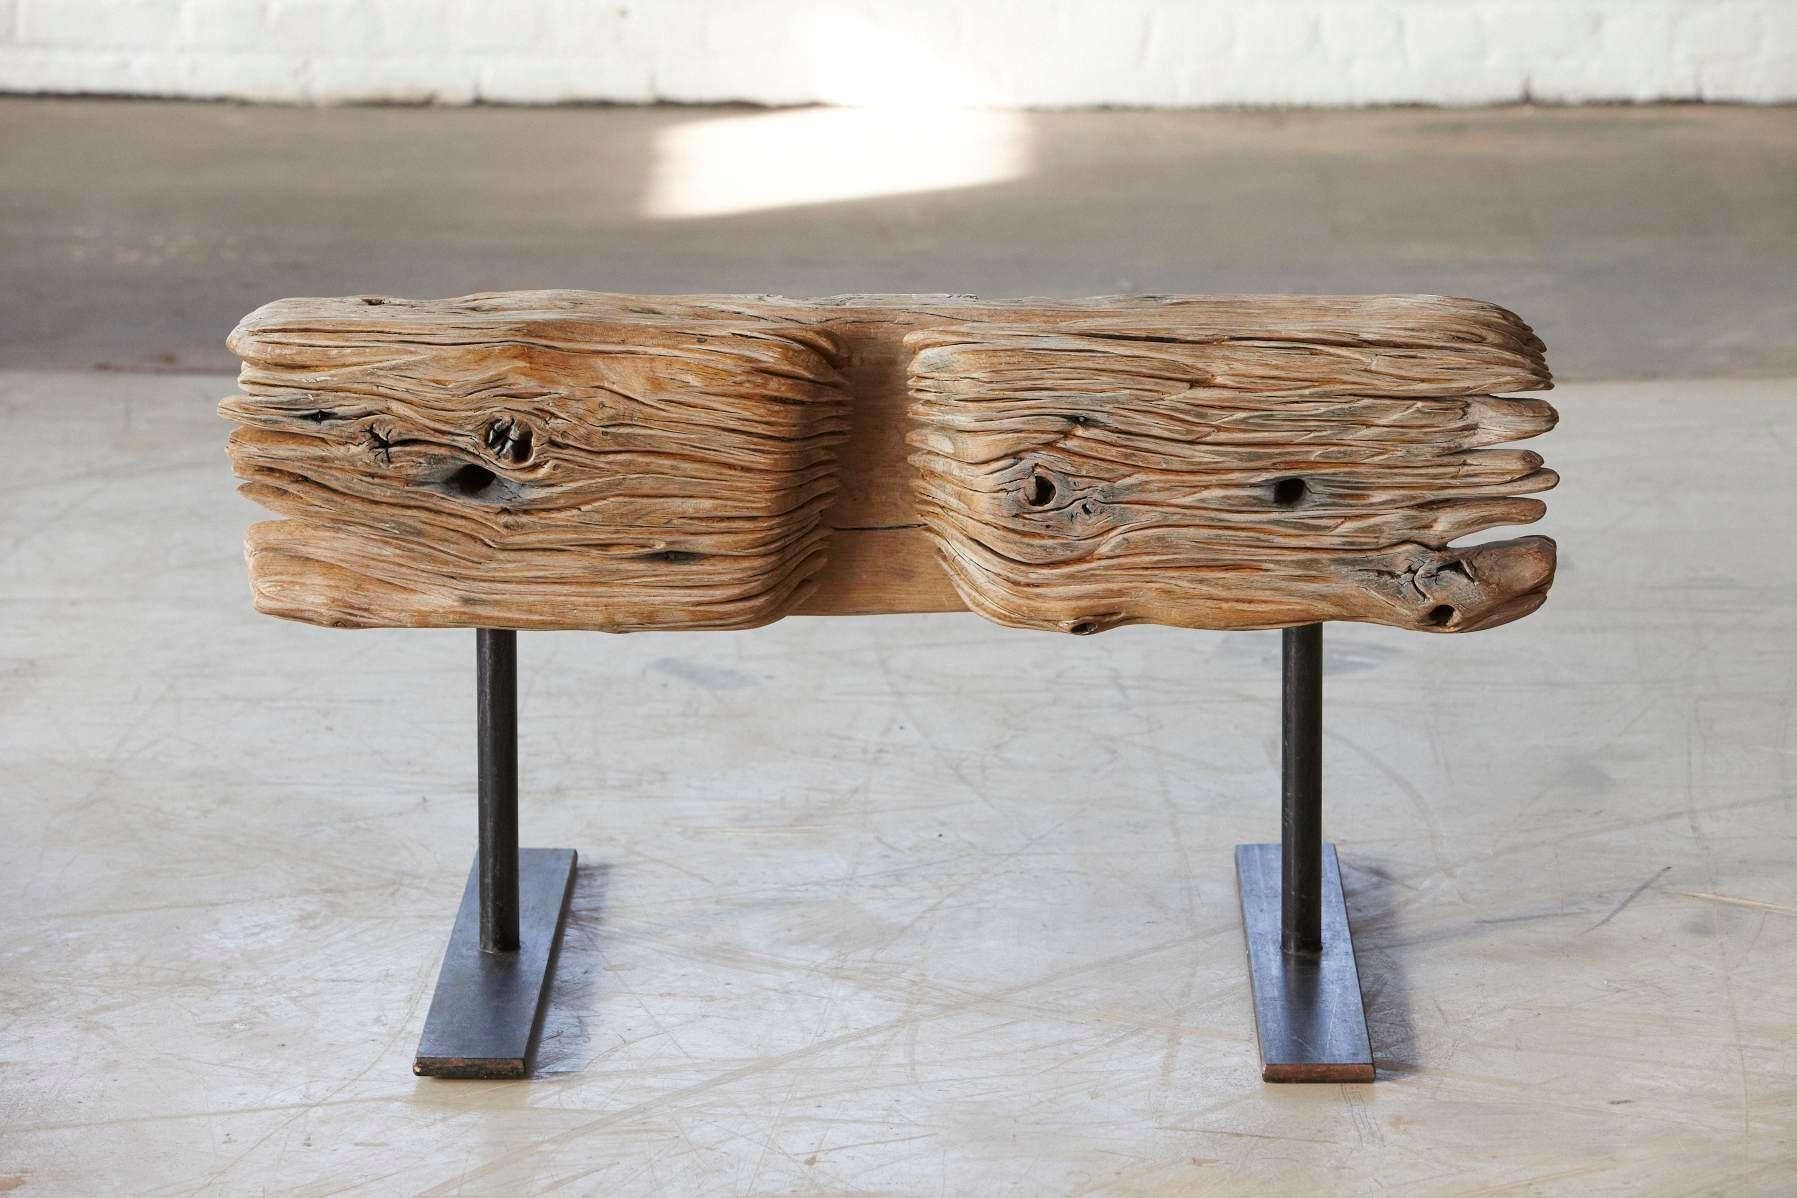 Bank 1 - bench 1
Bench made from a solid piece of oak mounted on a welded black iron legs by German artist Hanni Dietrich. 
All wood used by the artist is from salvaged oak beams or naturally fallen trees.
The integrated iron handles were as